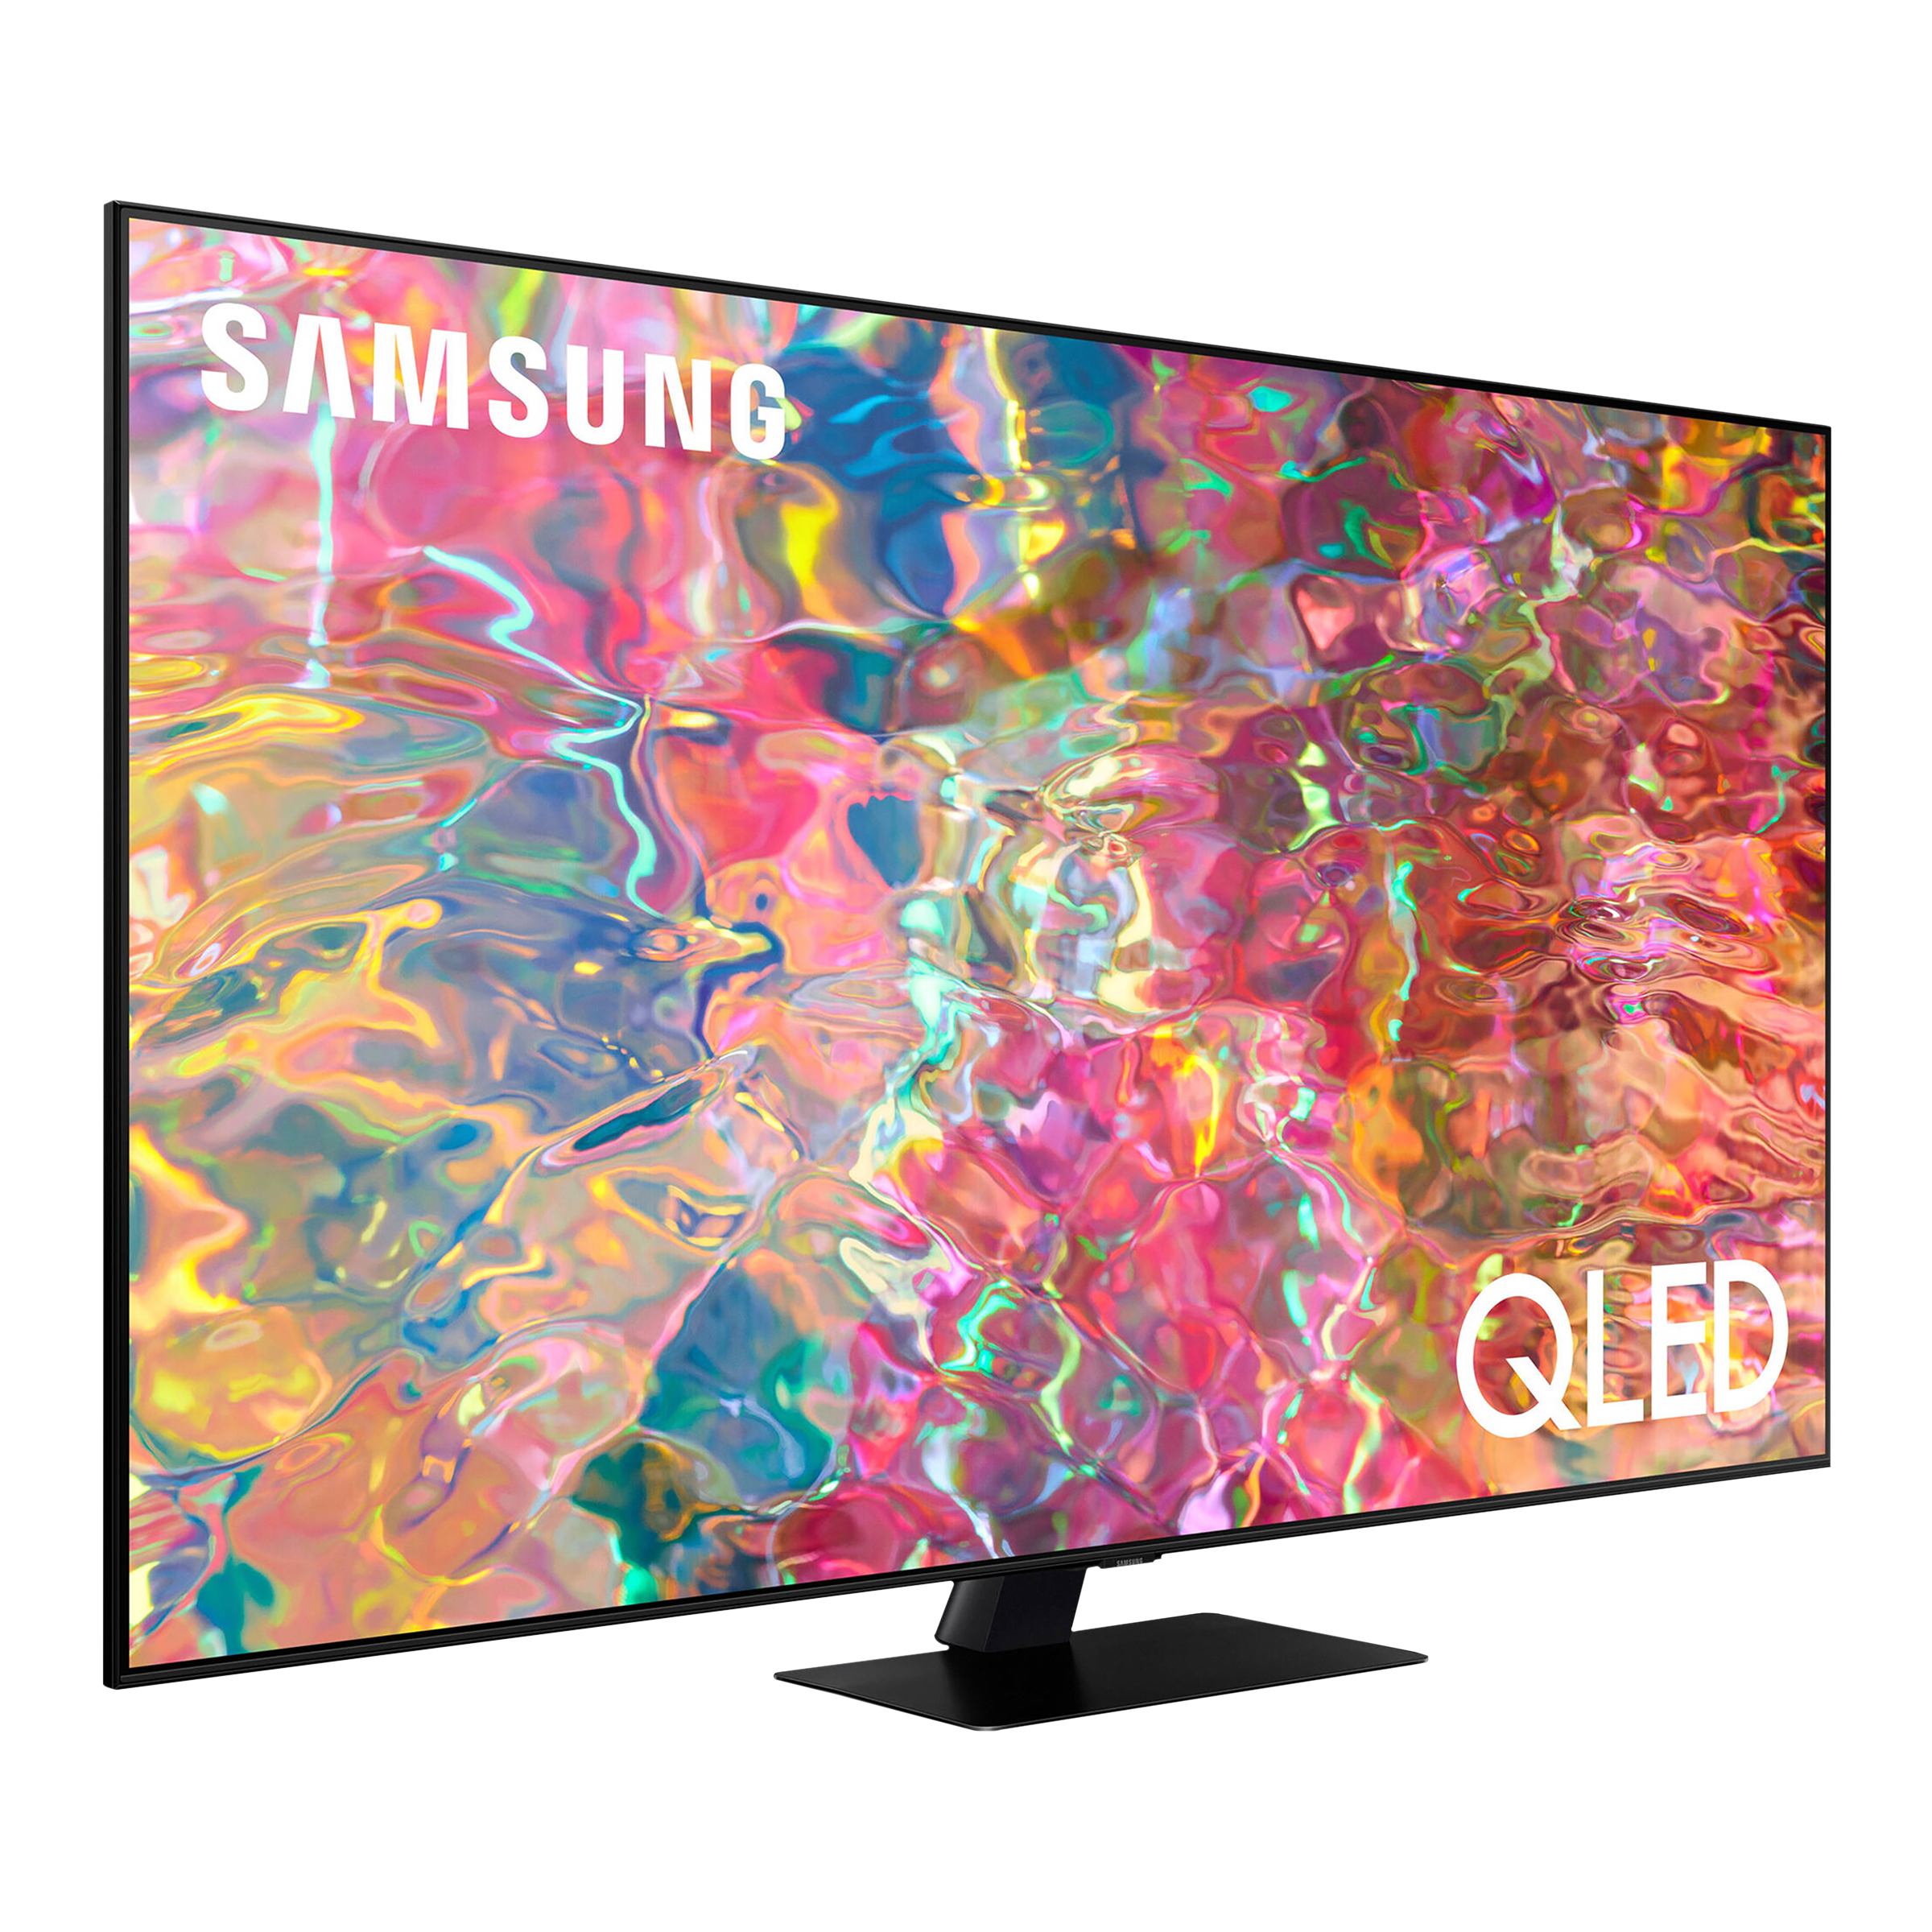 SAMSUNG Series 8 163 cm (65 inch) QLED 4K Ultra HD Tizen TV with Alexa Compatibility_4